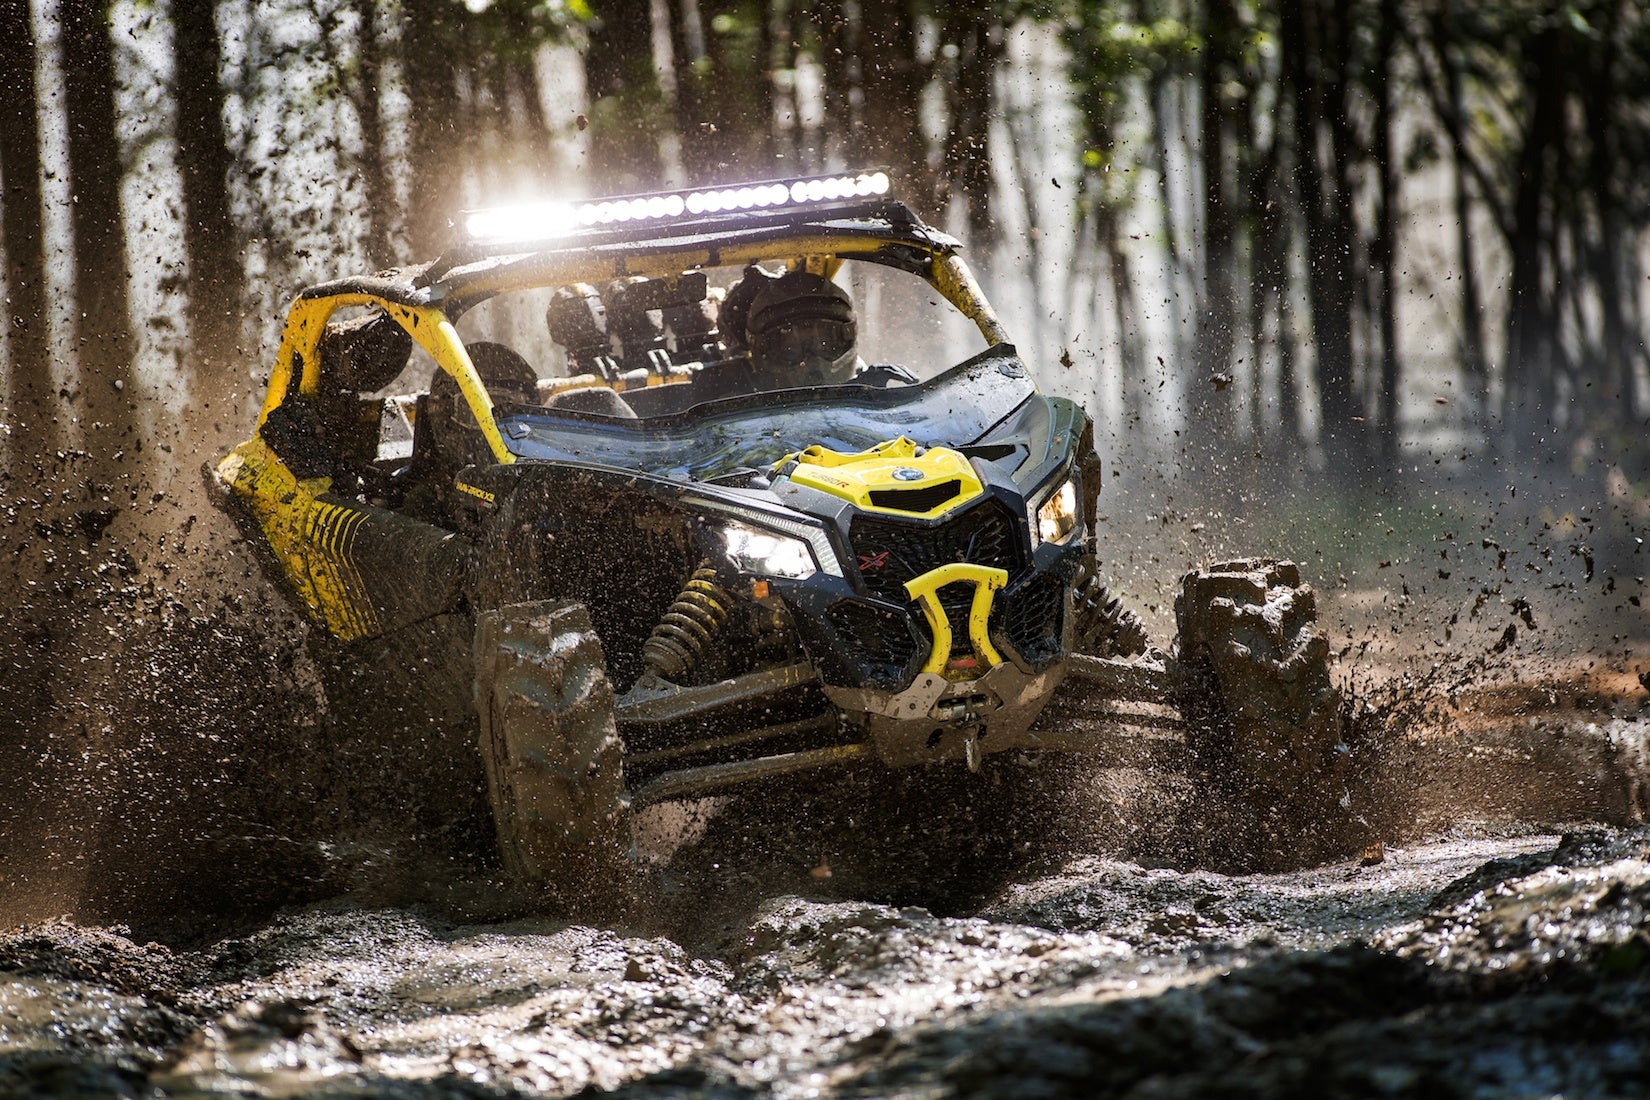 New CanAm Maverick X3 Models Ready for Mud, Rock Crawling and Thrills